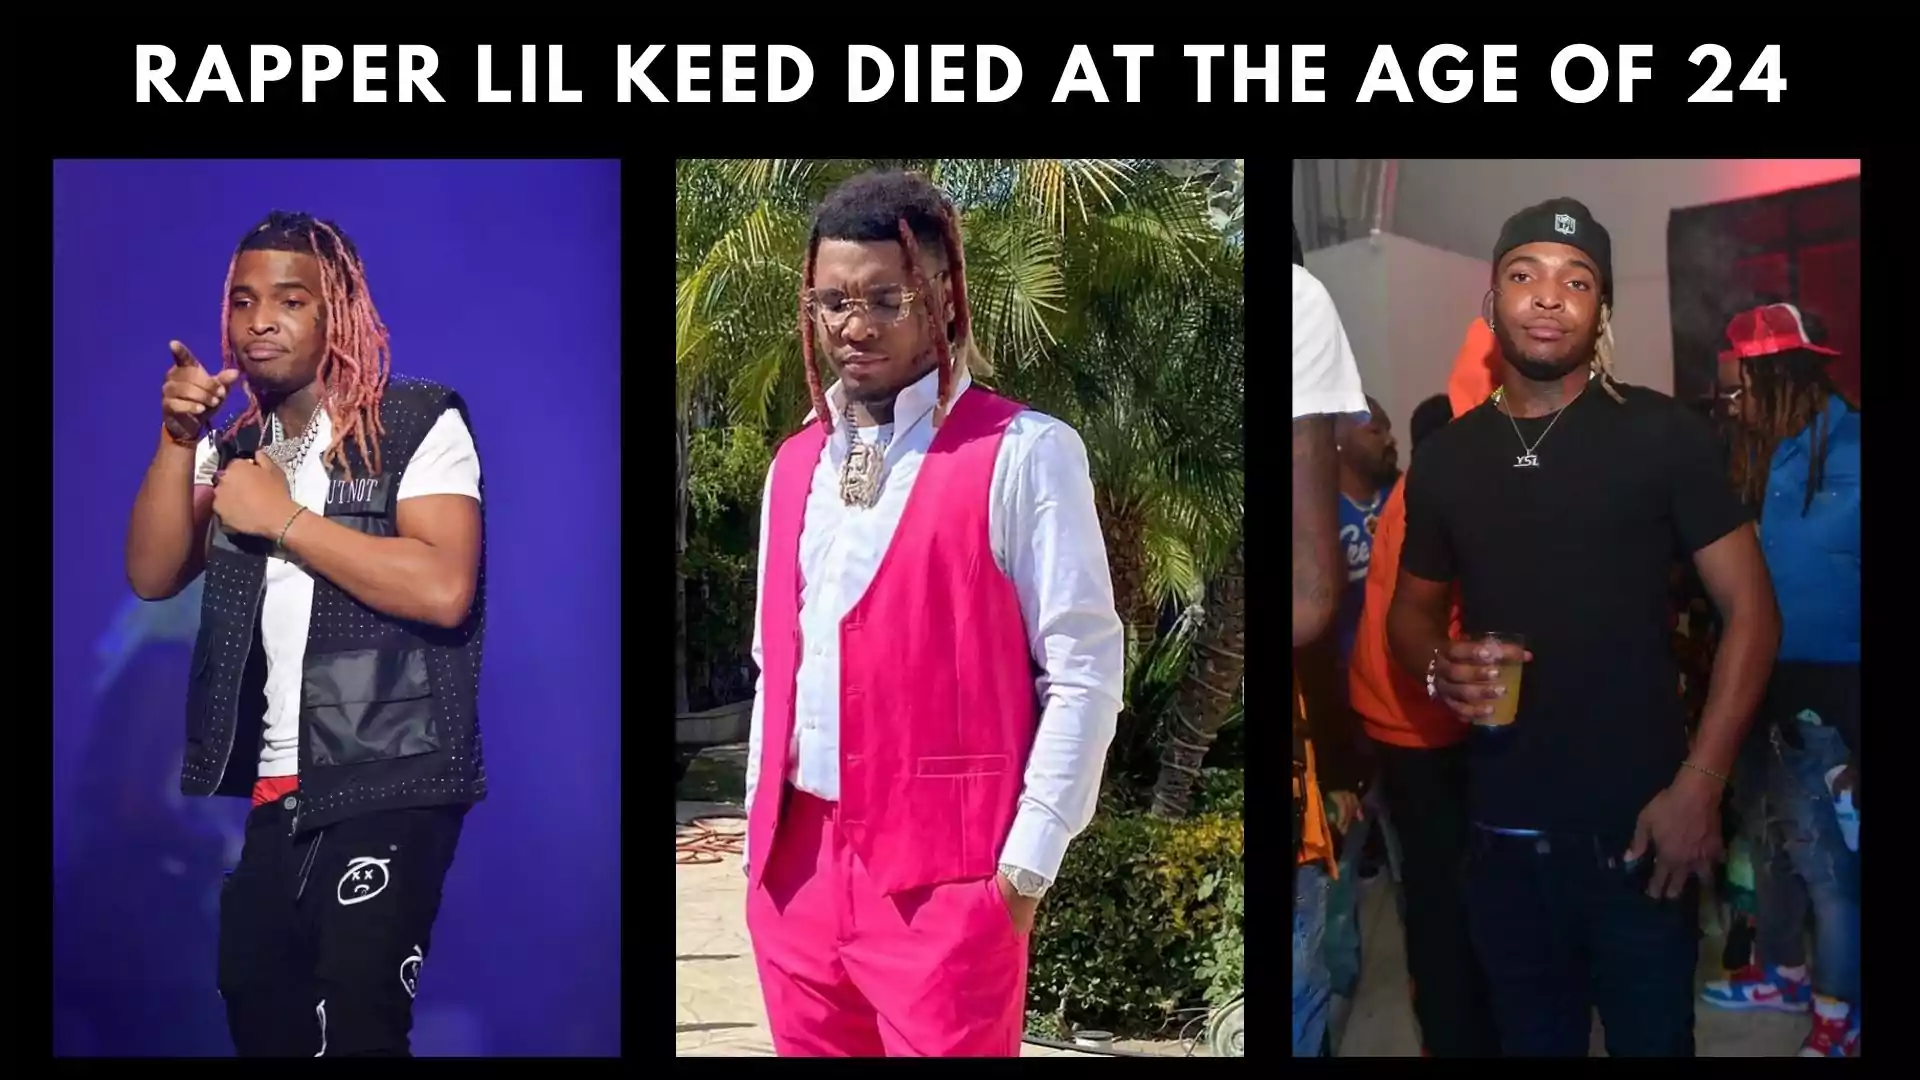 Rapper Lil Keed died at the age of 24